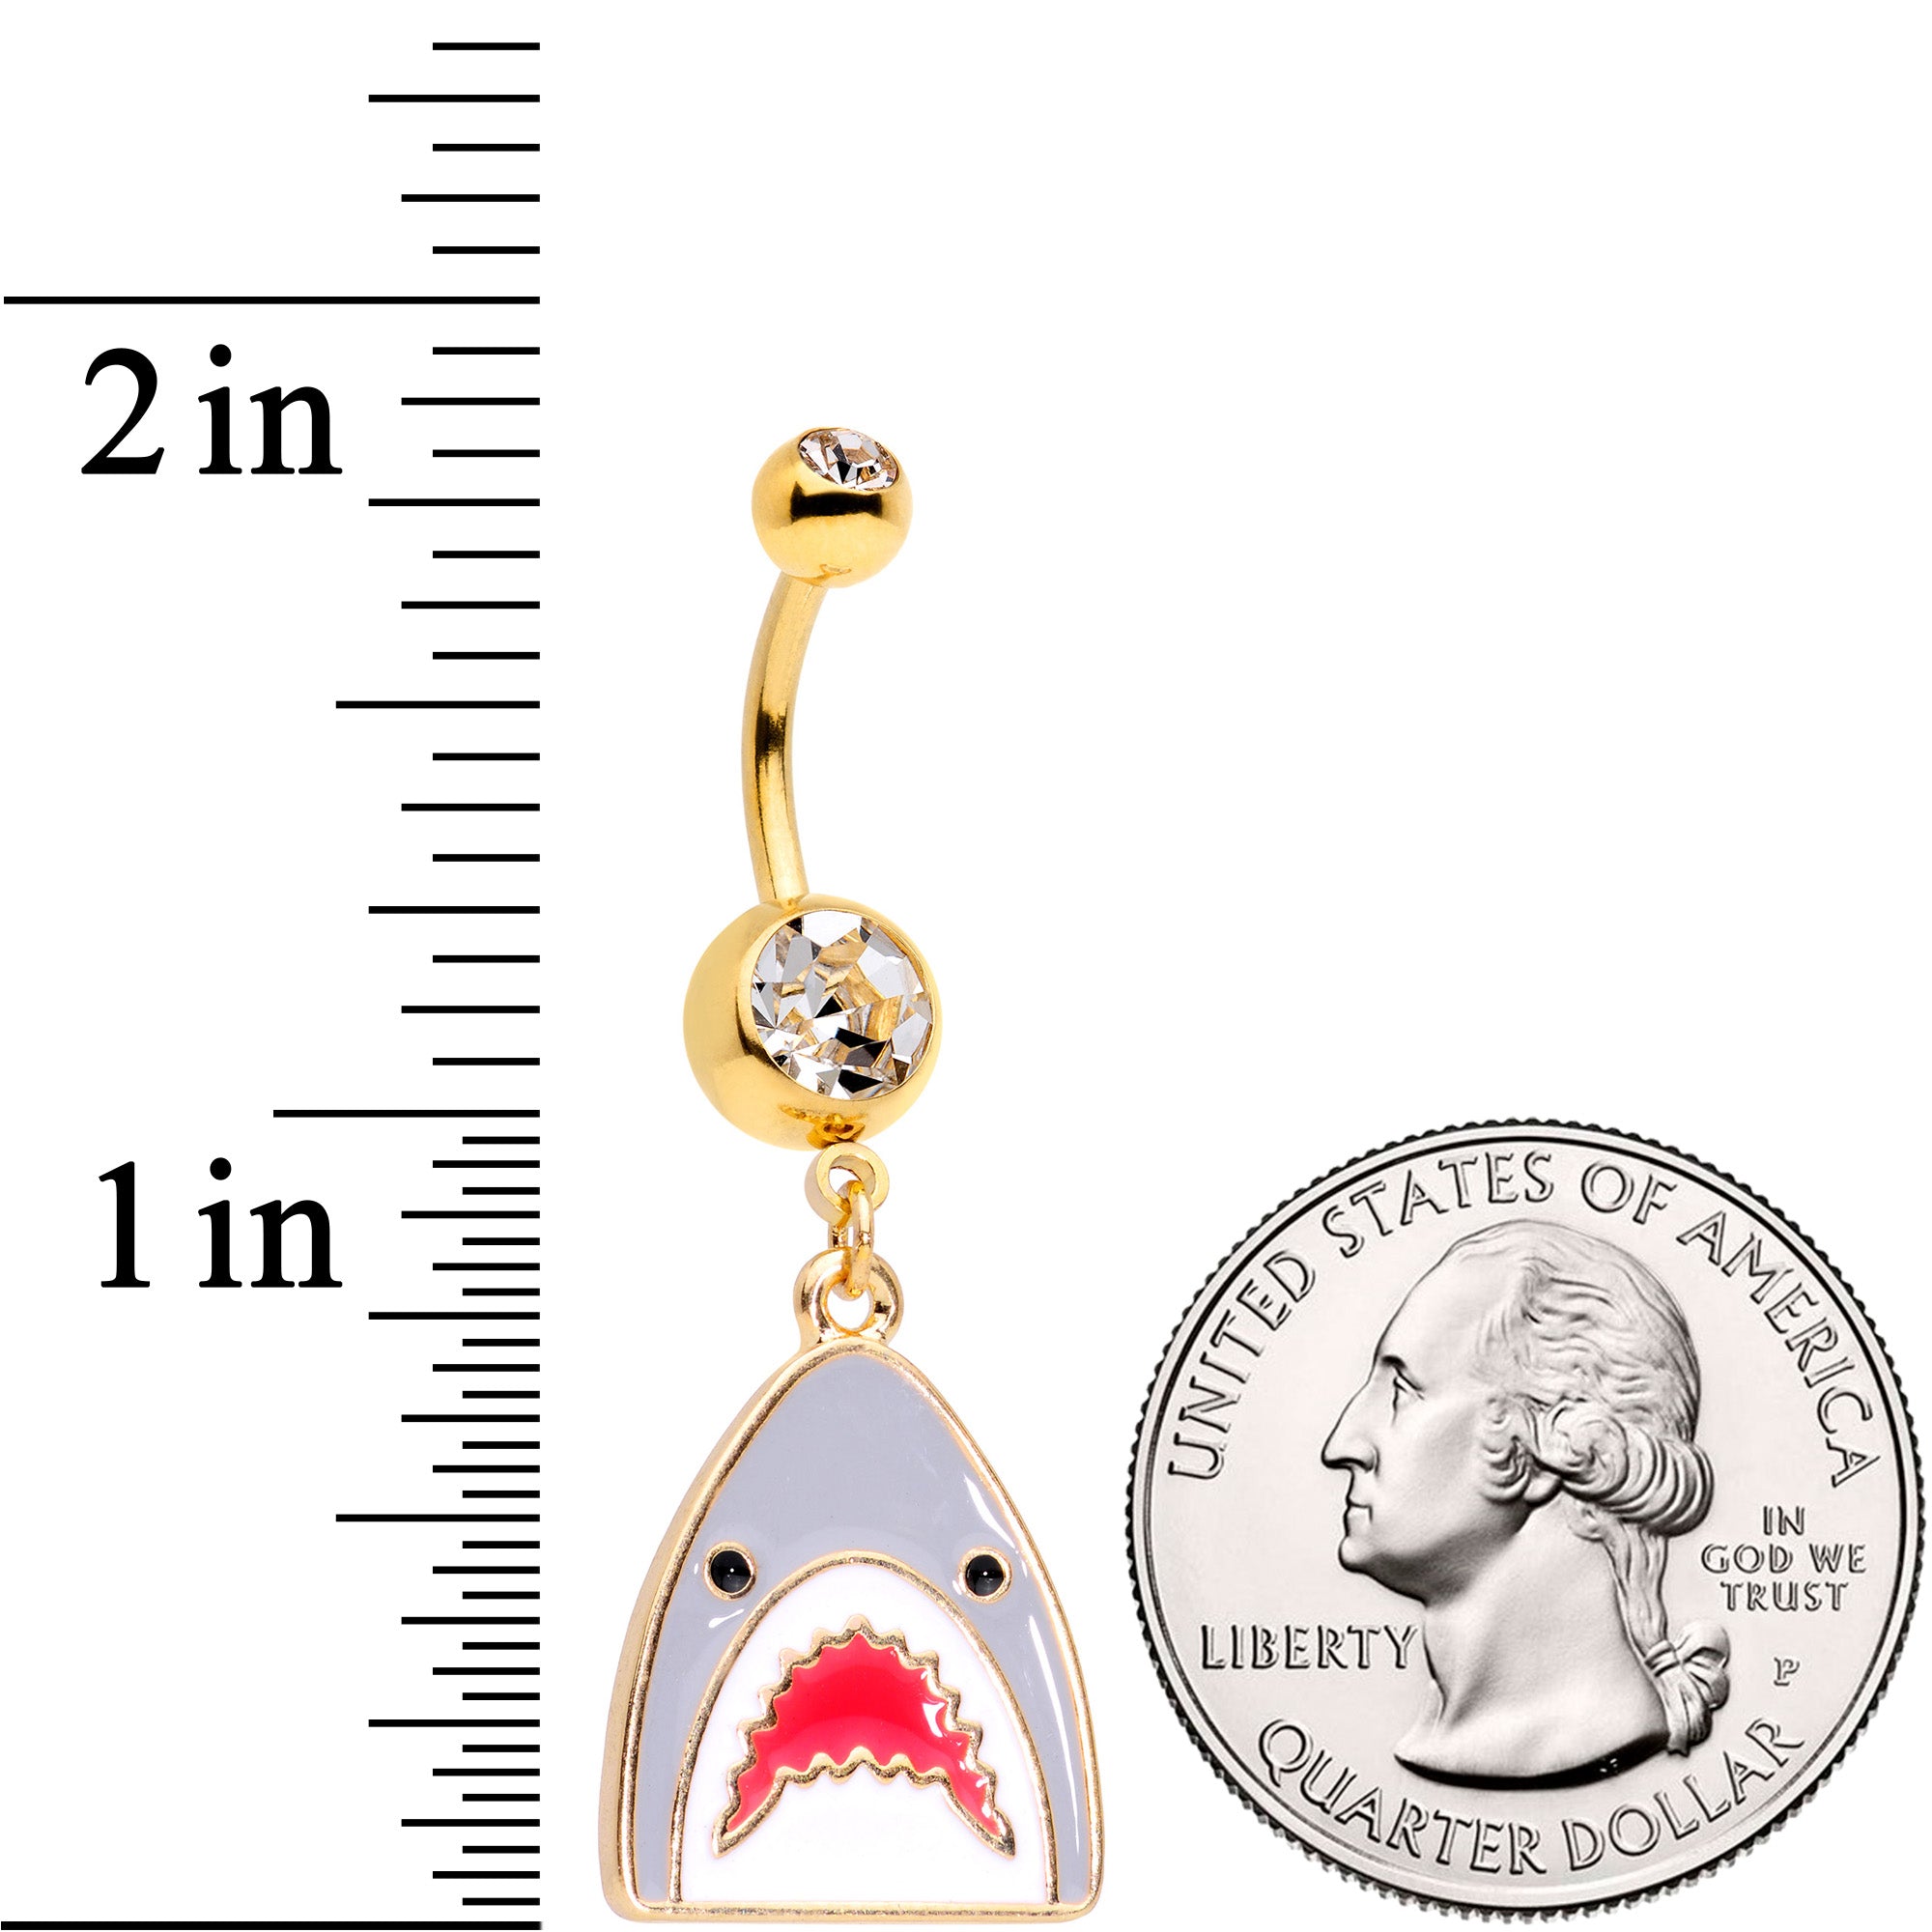 Clear Gem Gold Tone Shark Attack Dangle Belly Ring